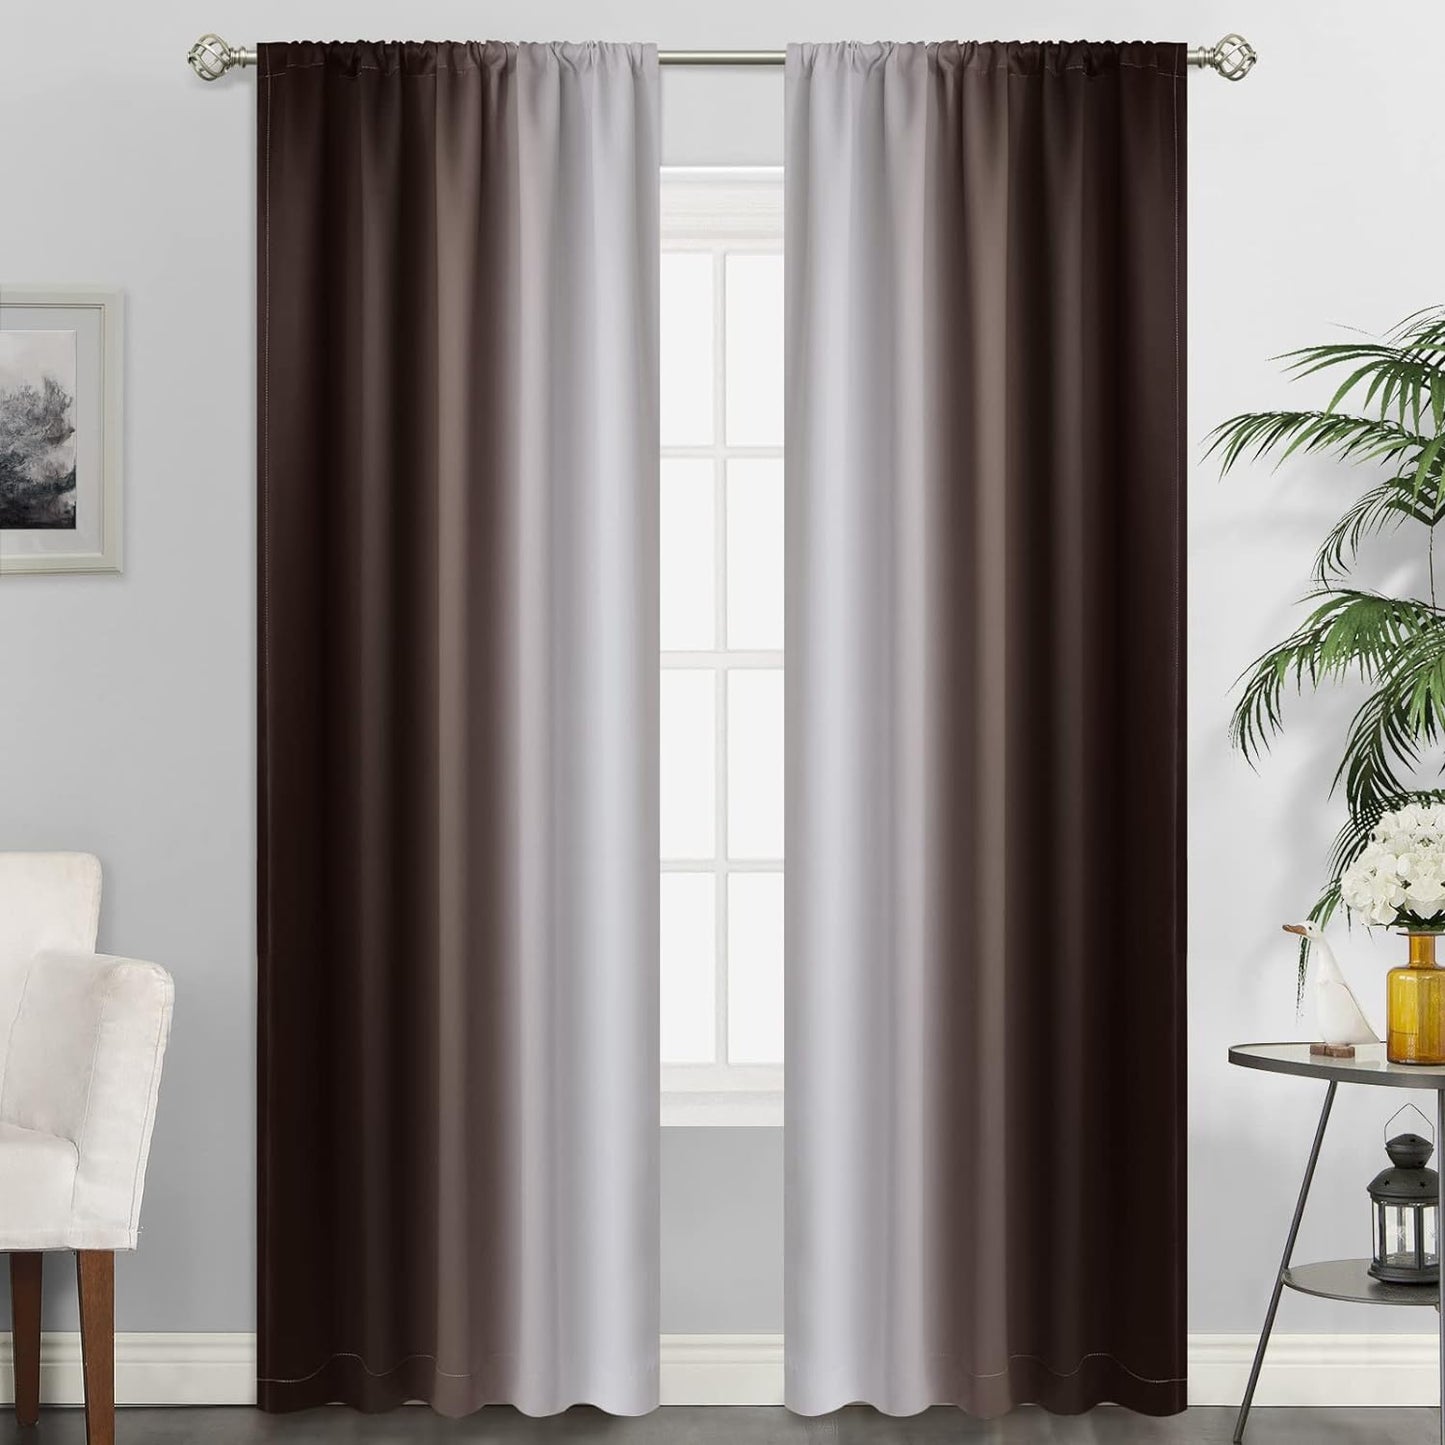 Simplehome Ombre Room Darkening Curtains for Bedroom, Light Blocking Gradient Purple to Greyish White Thermal Insulated Rod Pocket Window Curtains Drapes for Living Room,2 Panels, 52X84 Inches Length  SimpleHome Brown 52W X 84L / 2 Panels 